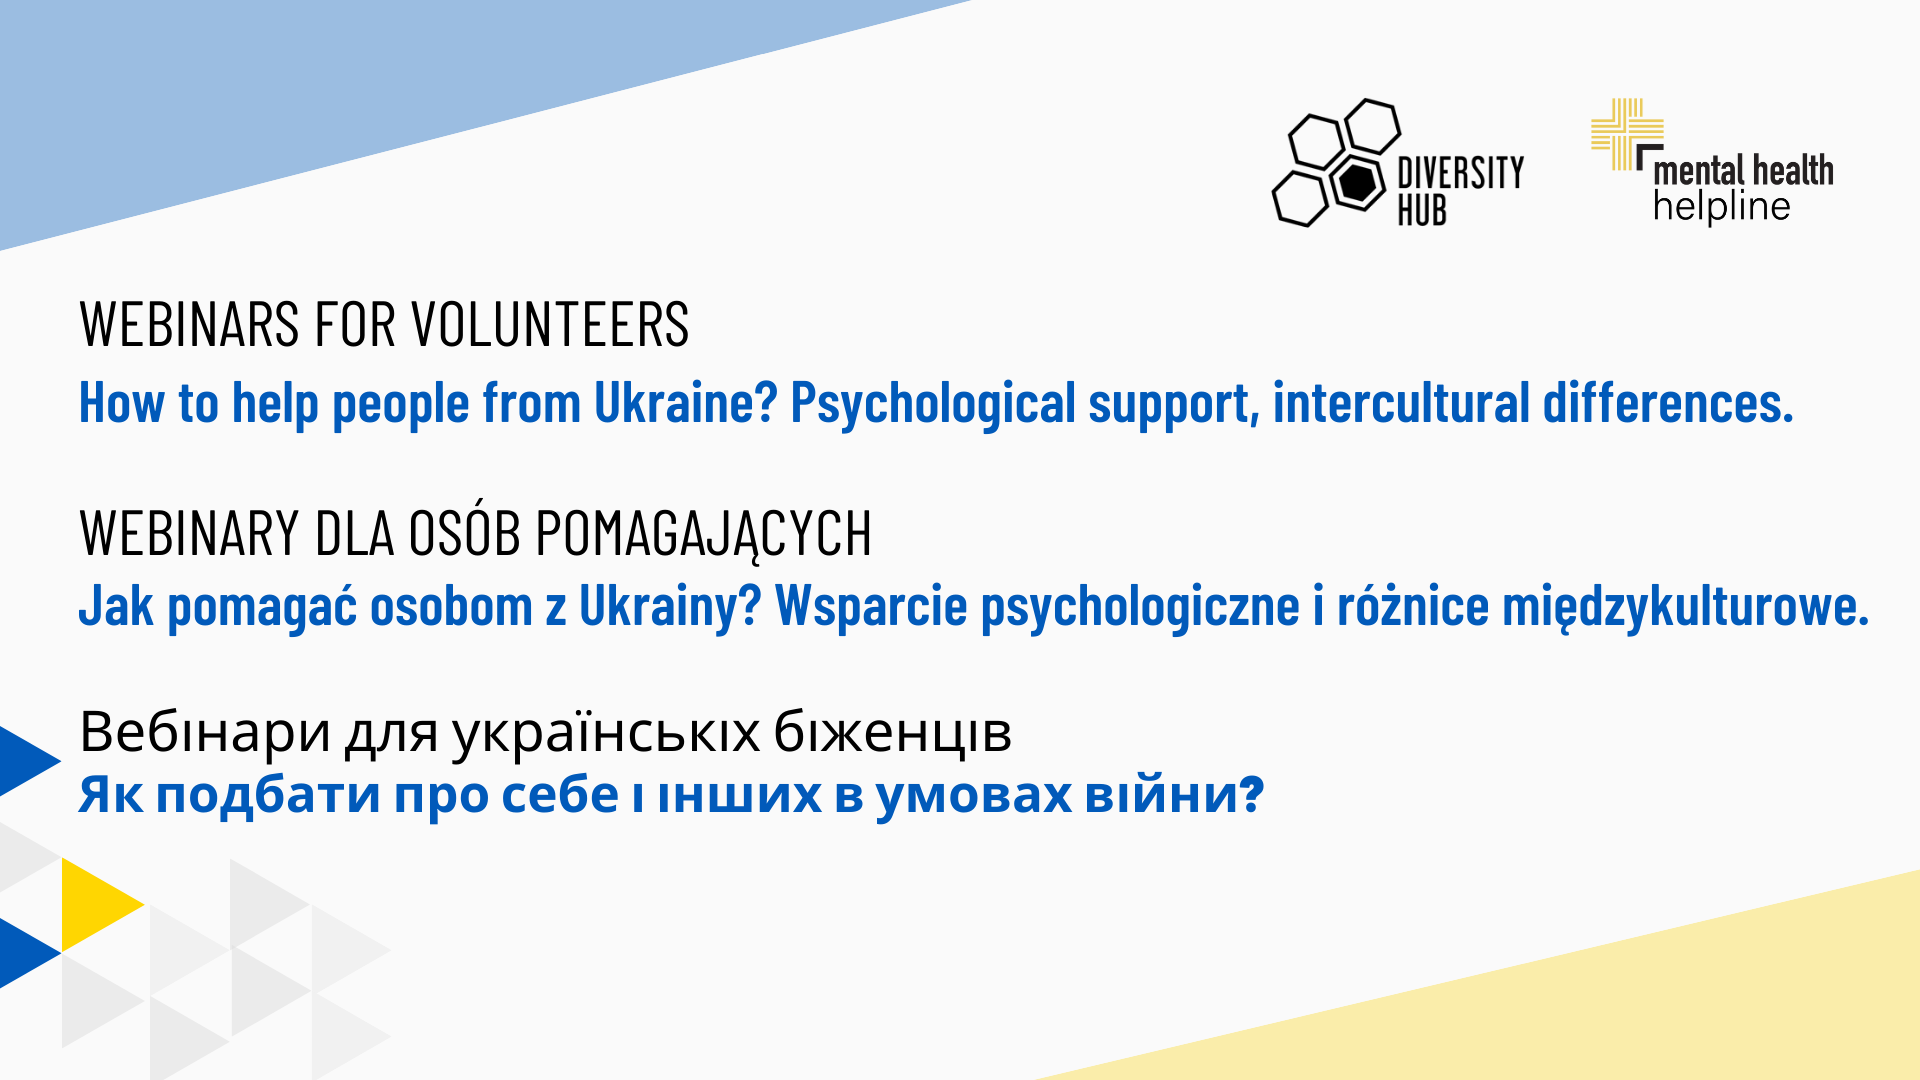 Webinars for volunteers - How to help people from Ukraine? Psychological support, intercultural differences.